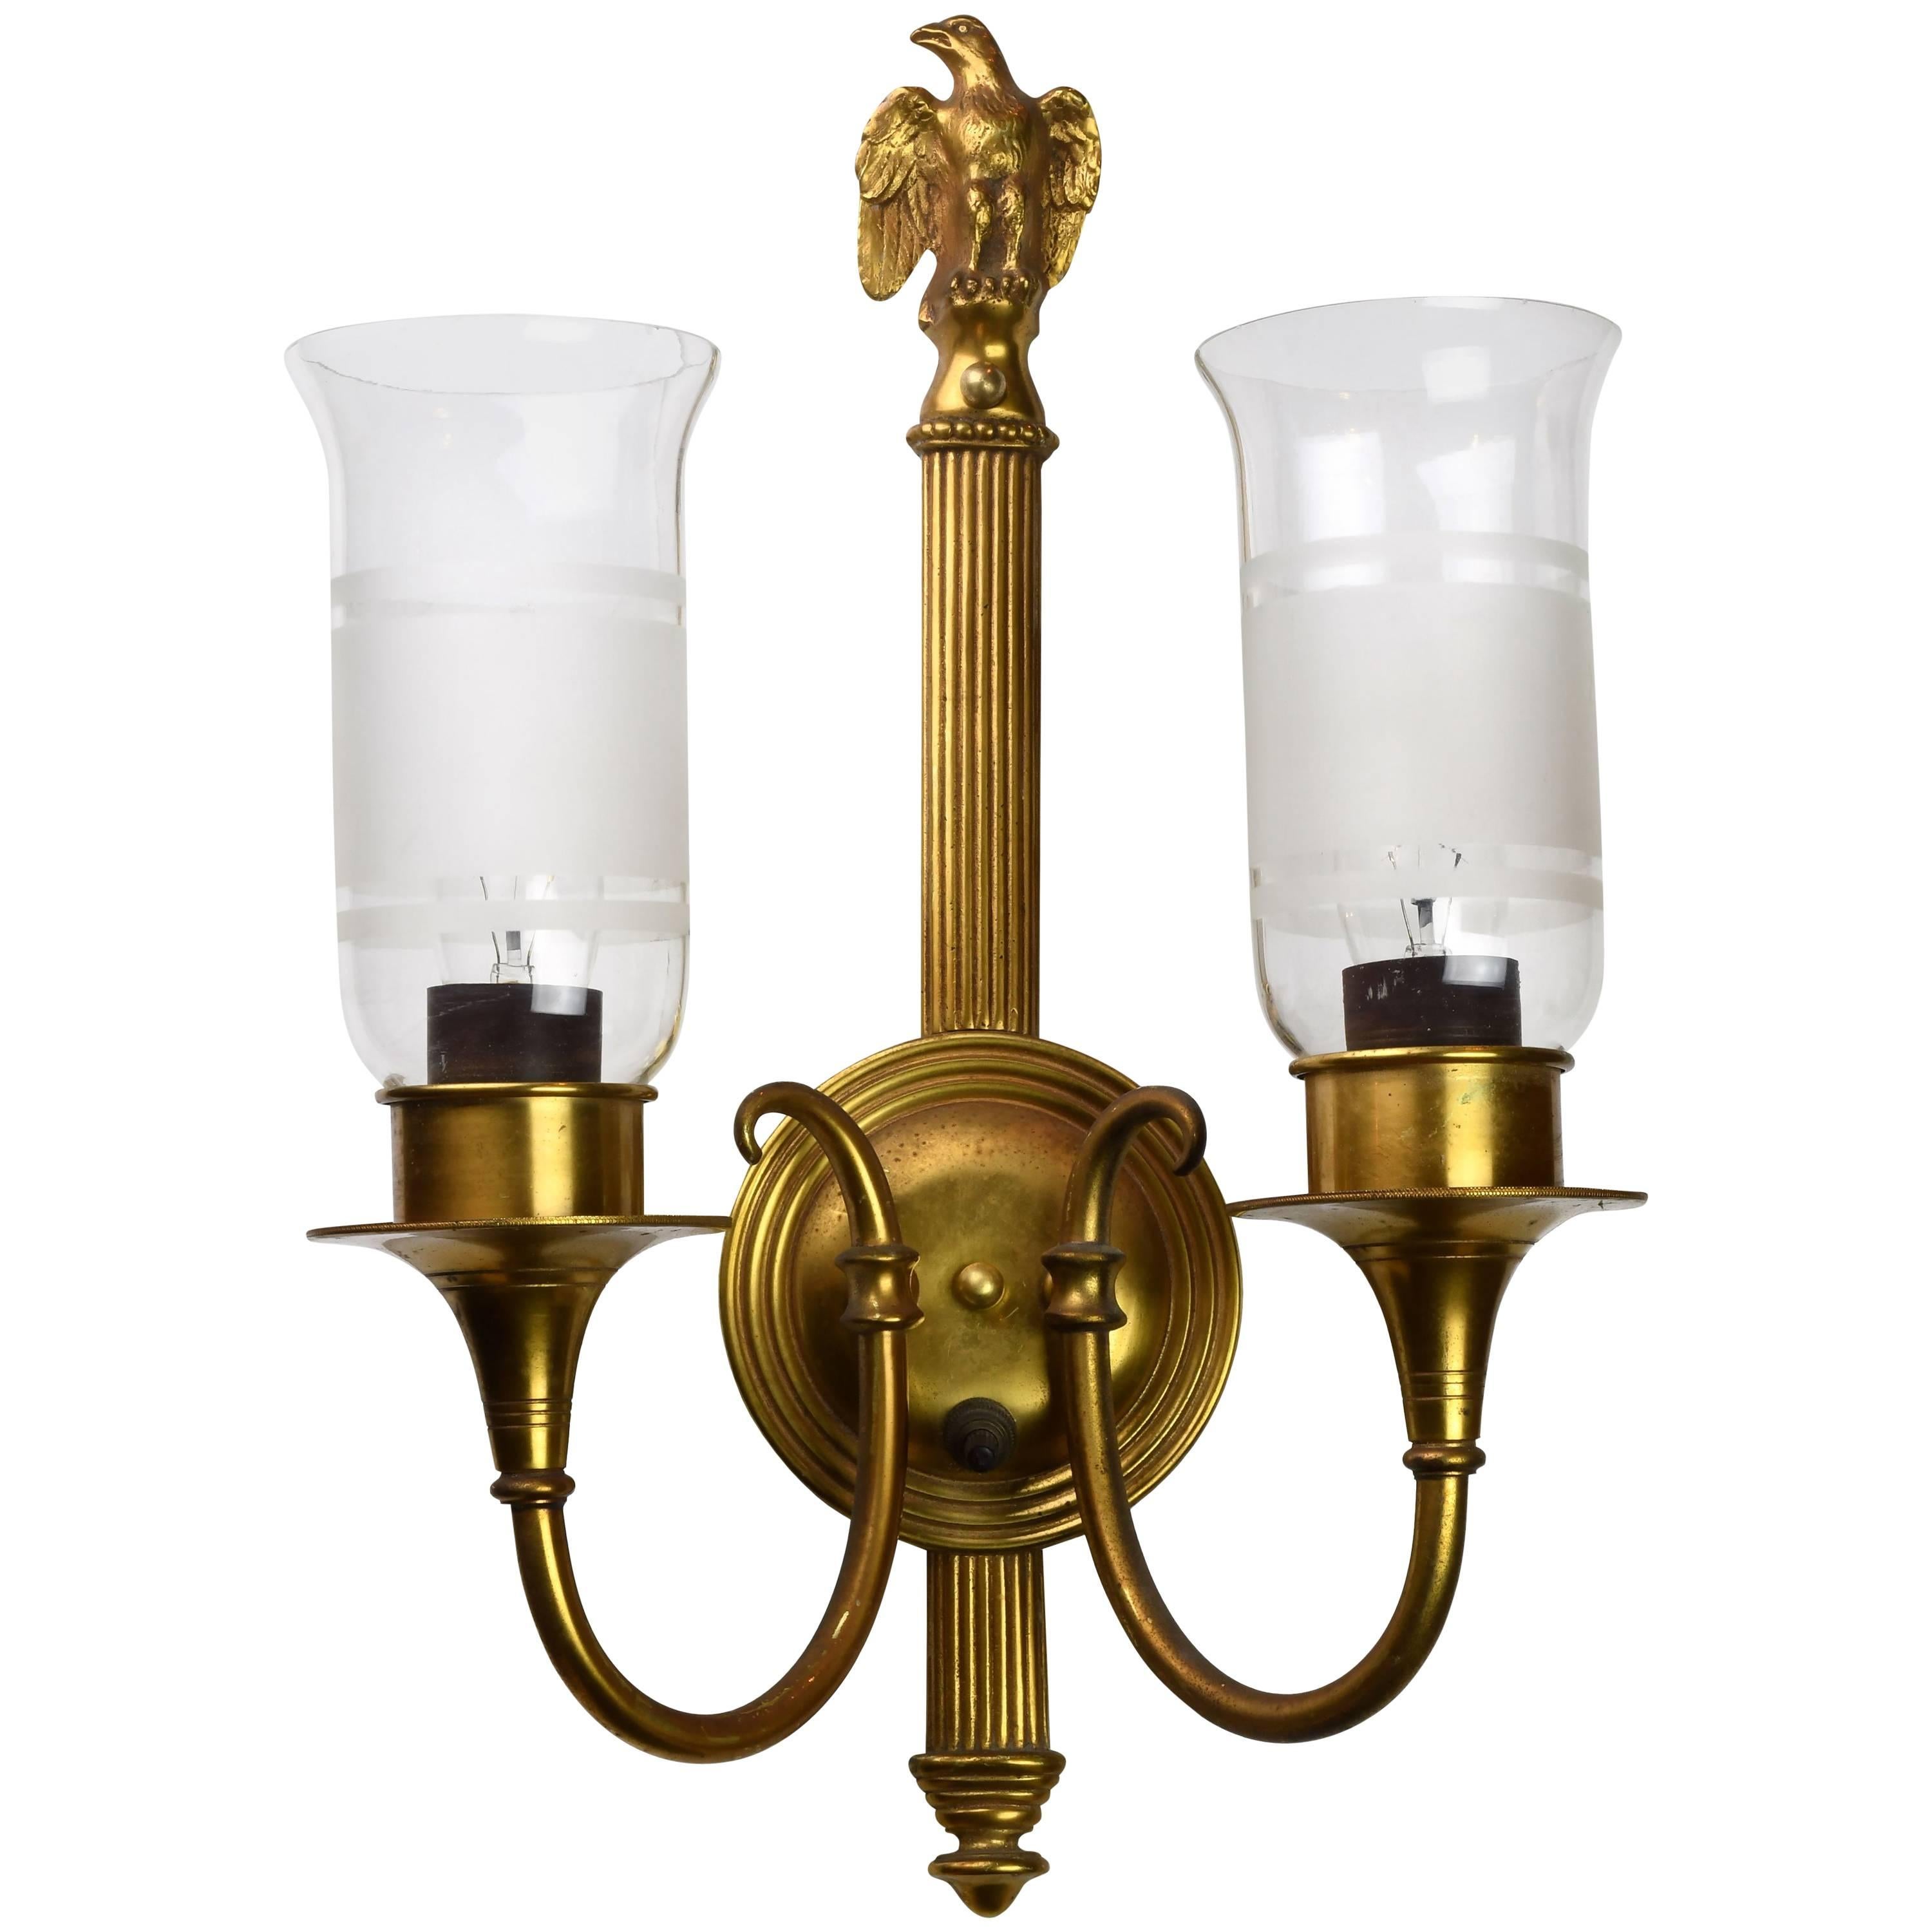 Two-Arm Brass Eagle Sconce with Shades